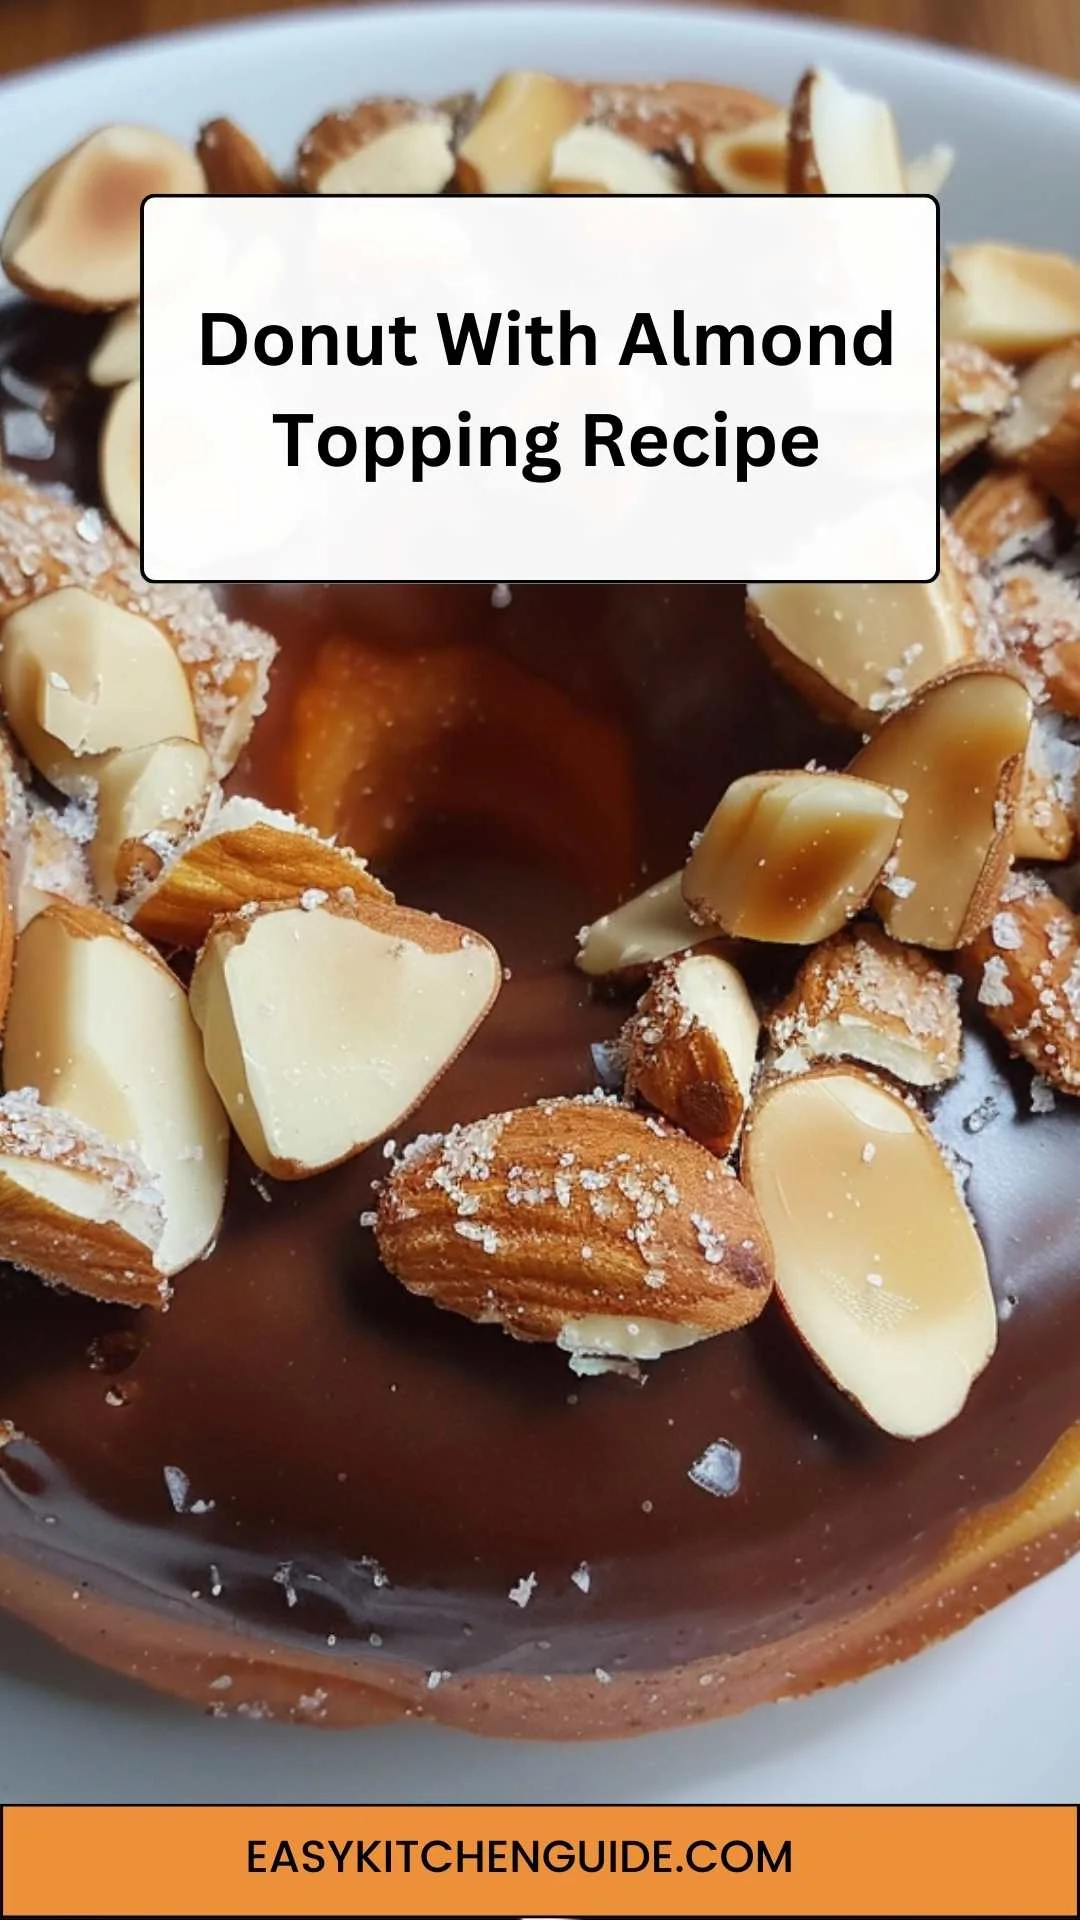 Donut With Almond Topping Recipe